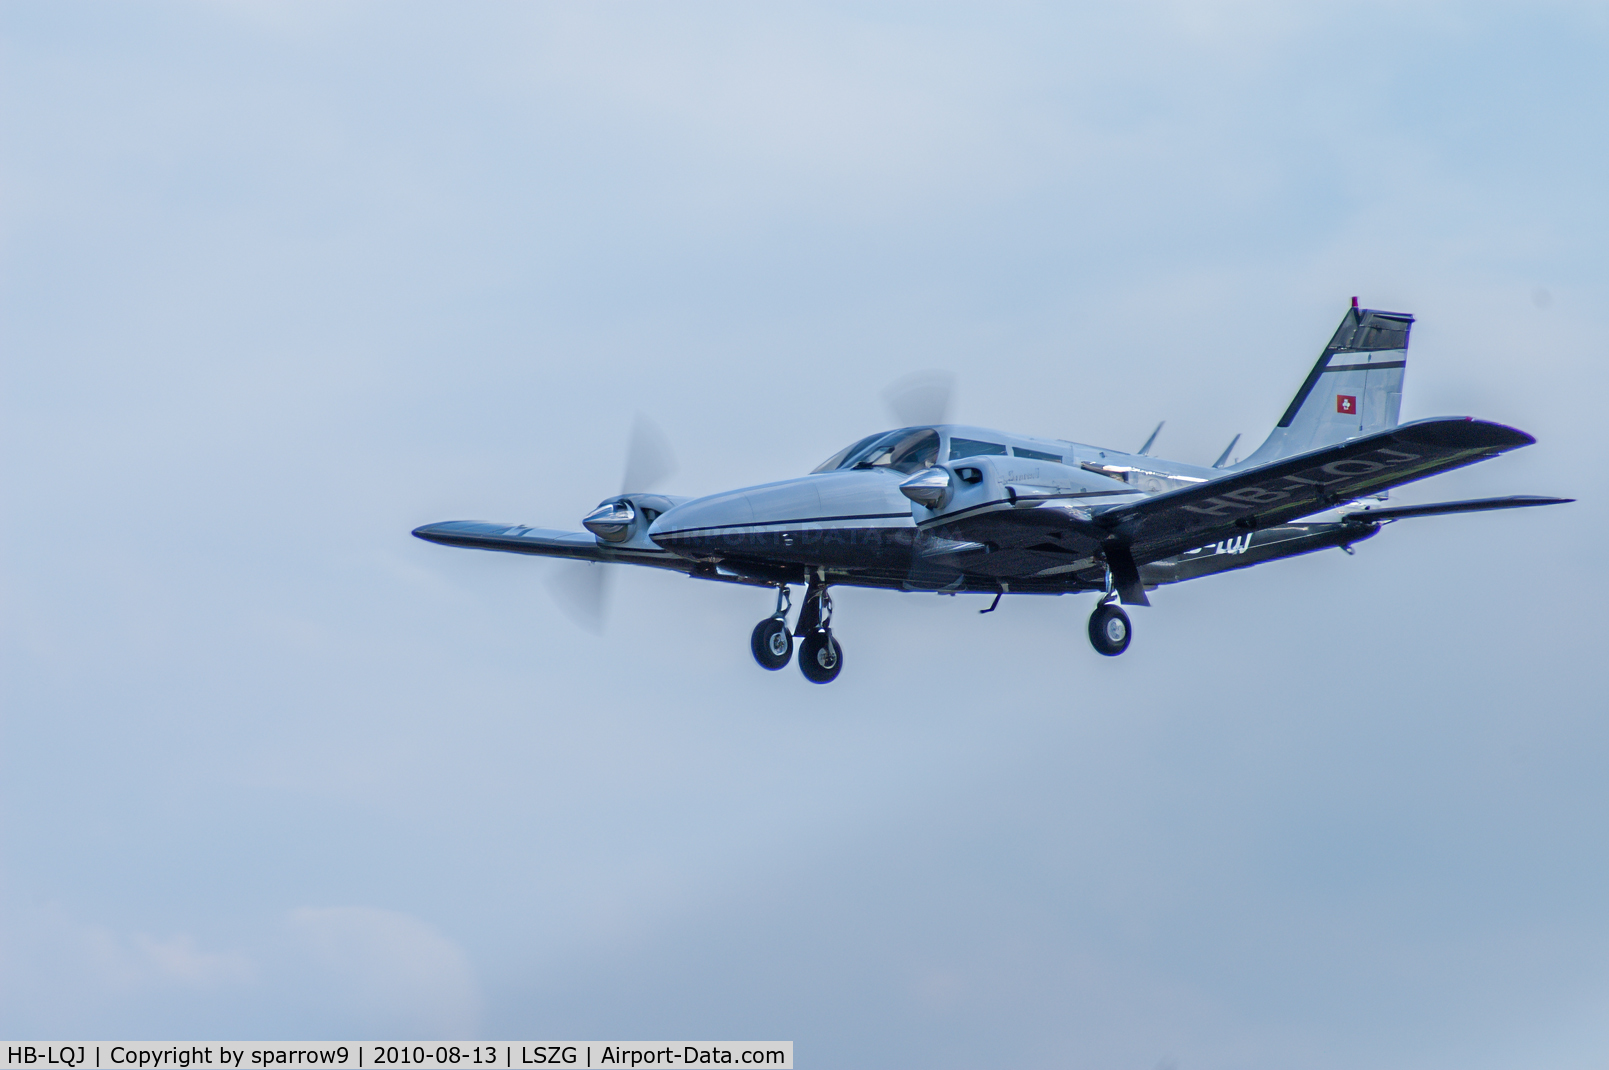 HB-LQJ, 1973 Piper PA-34-200 C/N 34-7350164, On short final runway 05 Grenchen. HB-registered from 1988-03-11.